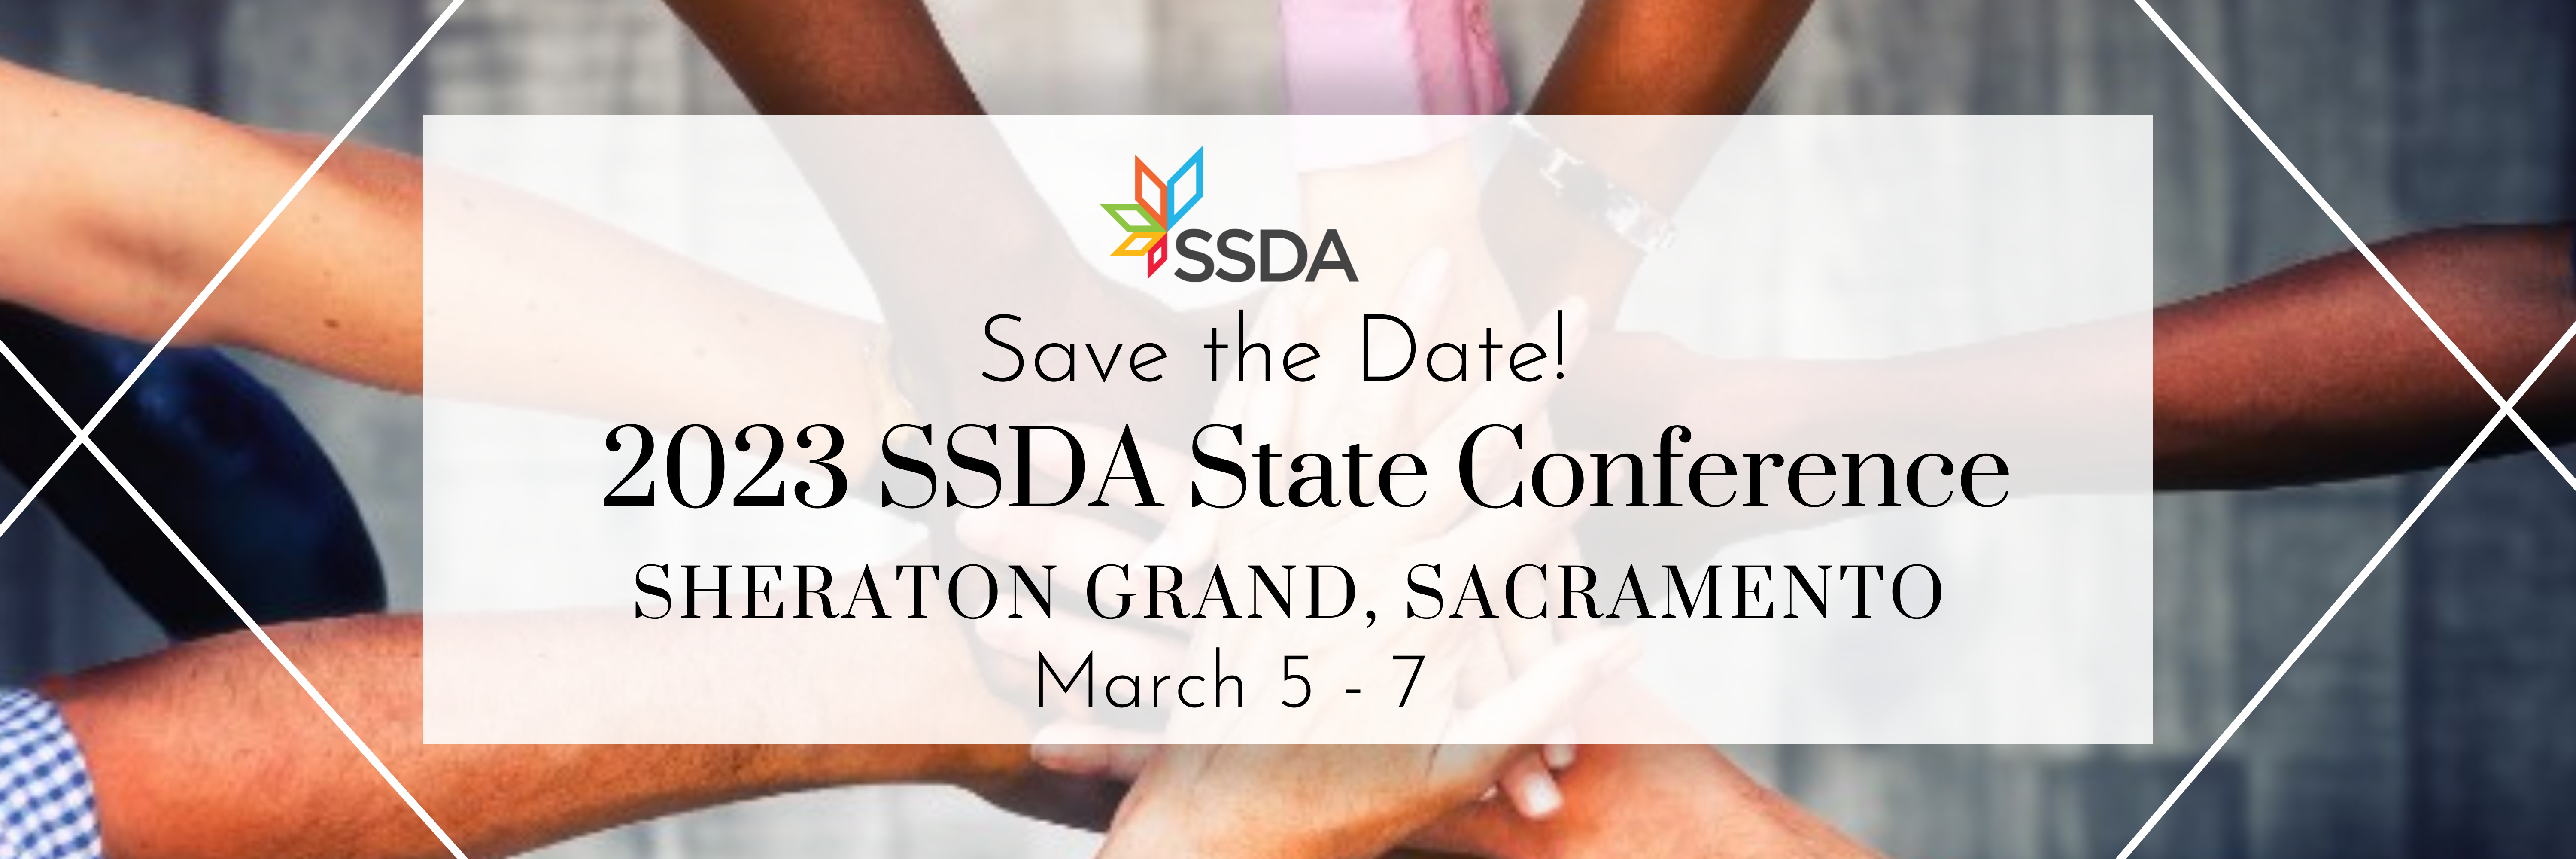 SSDA State Conference ad